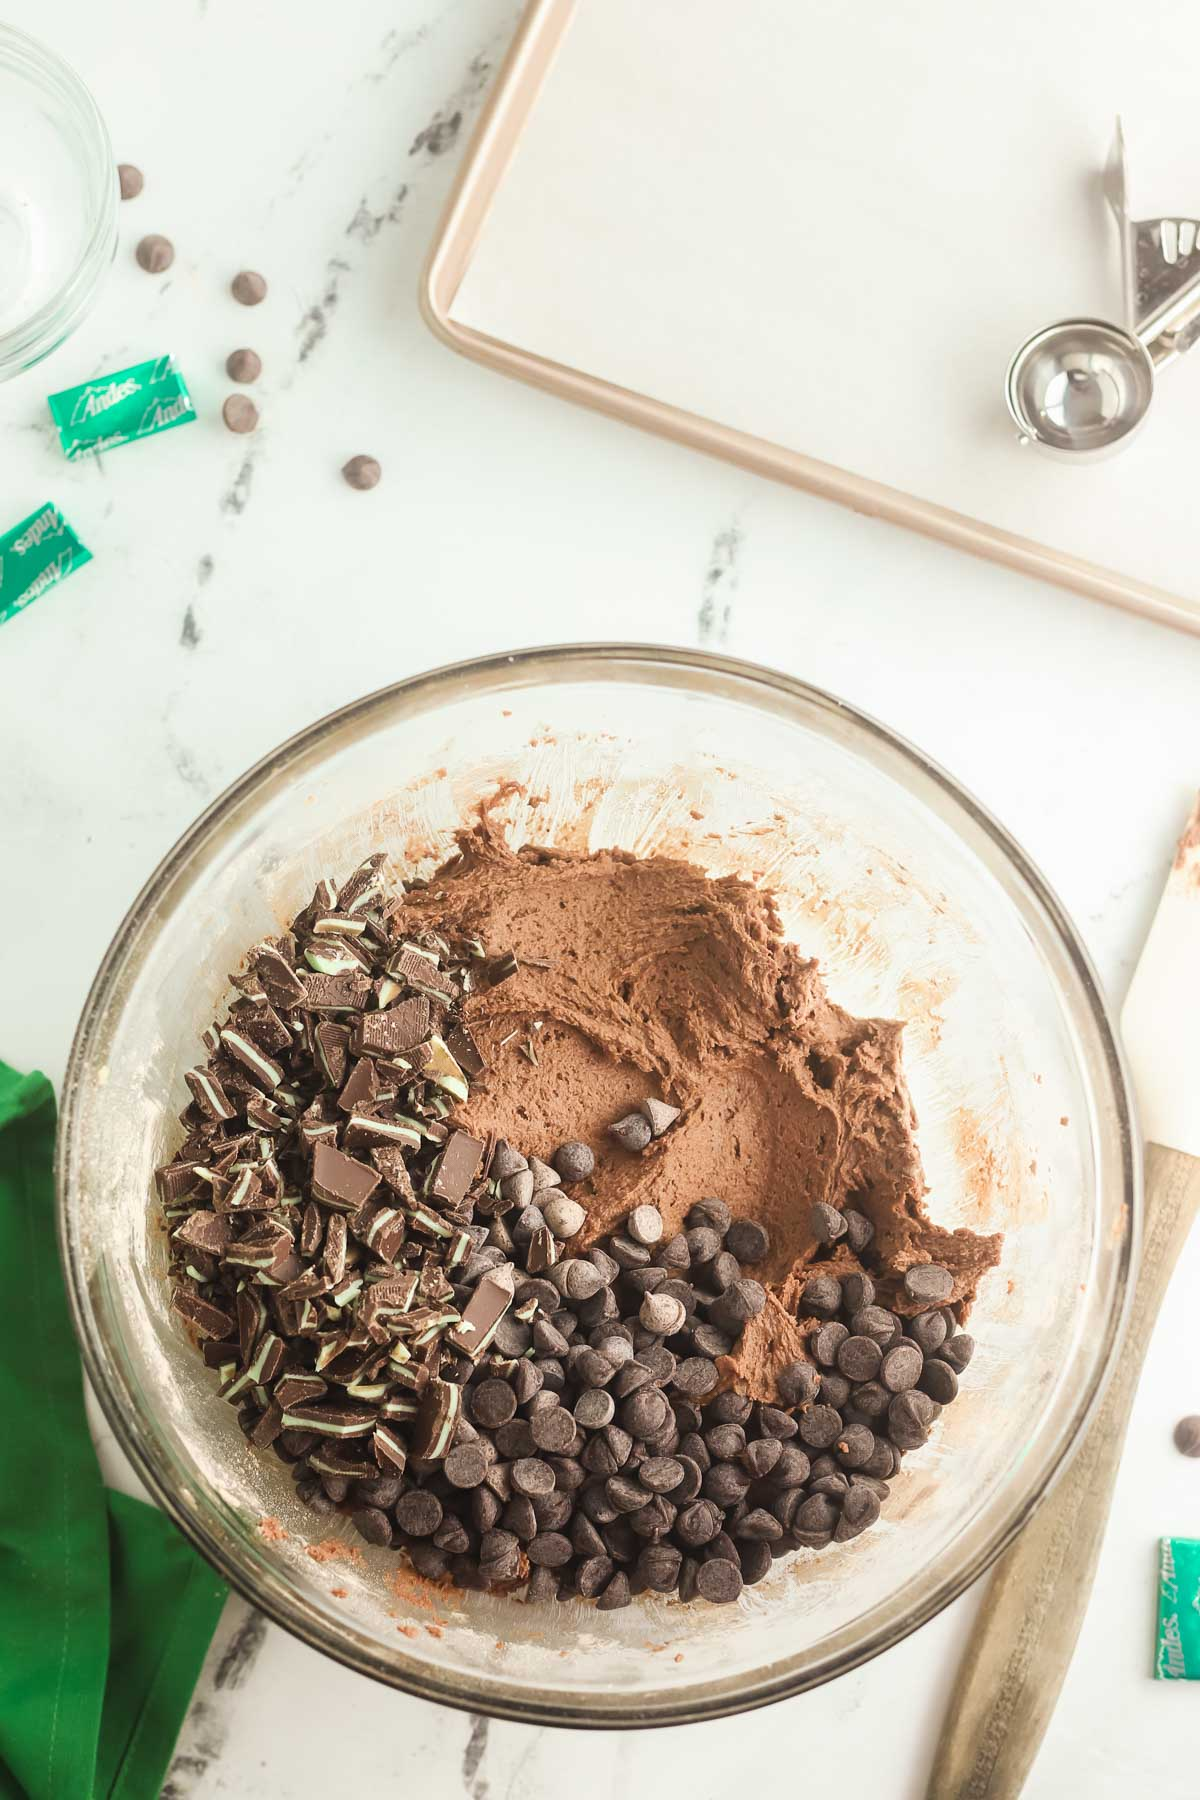 Andes mint chocolate cookie dough in bowl with chocoolate chips and Andes mints added.